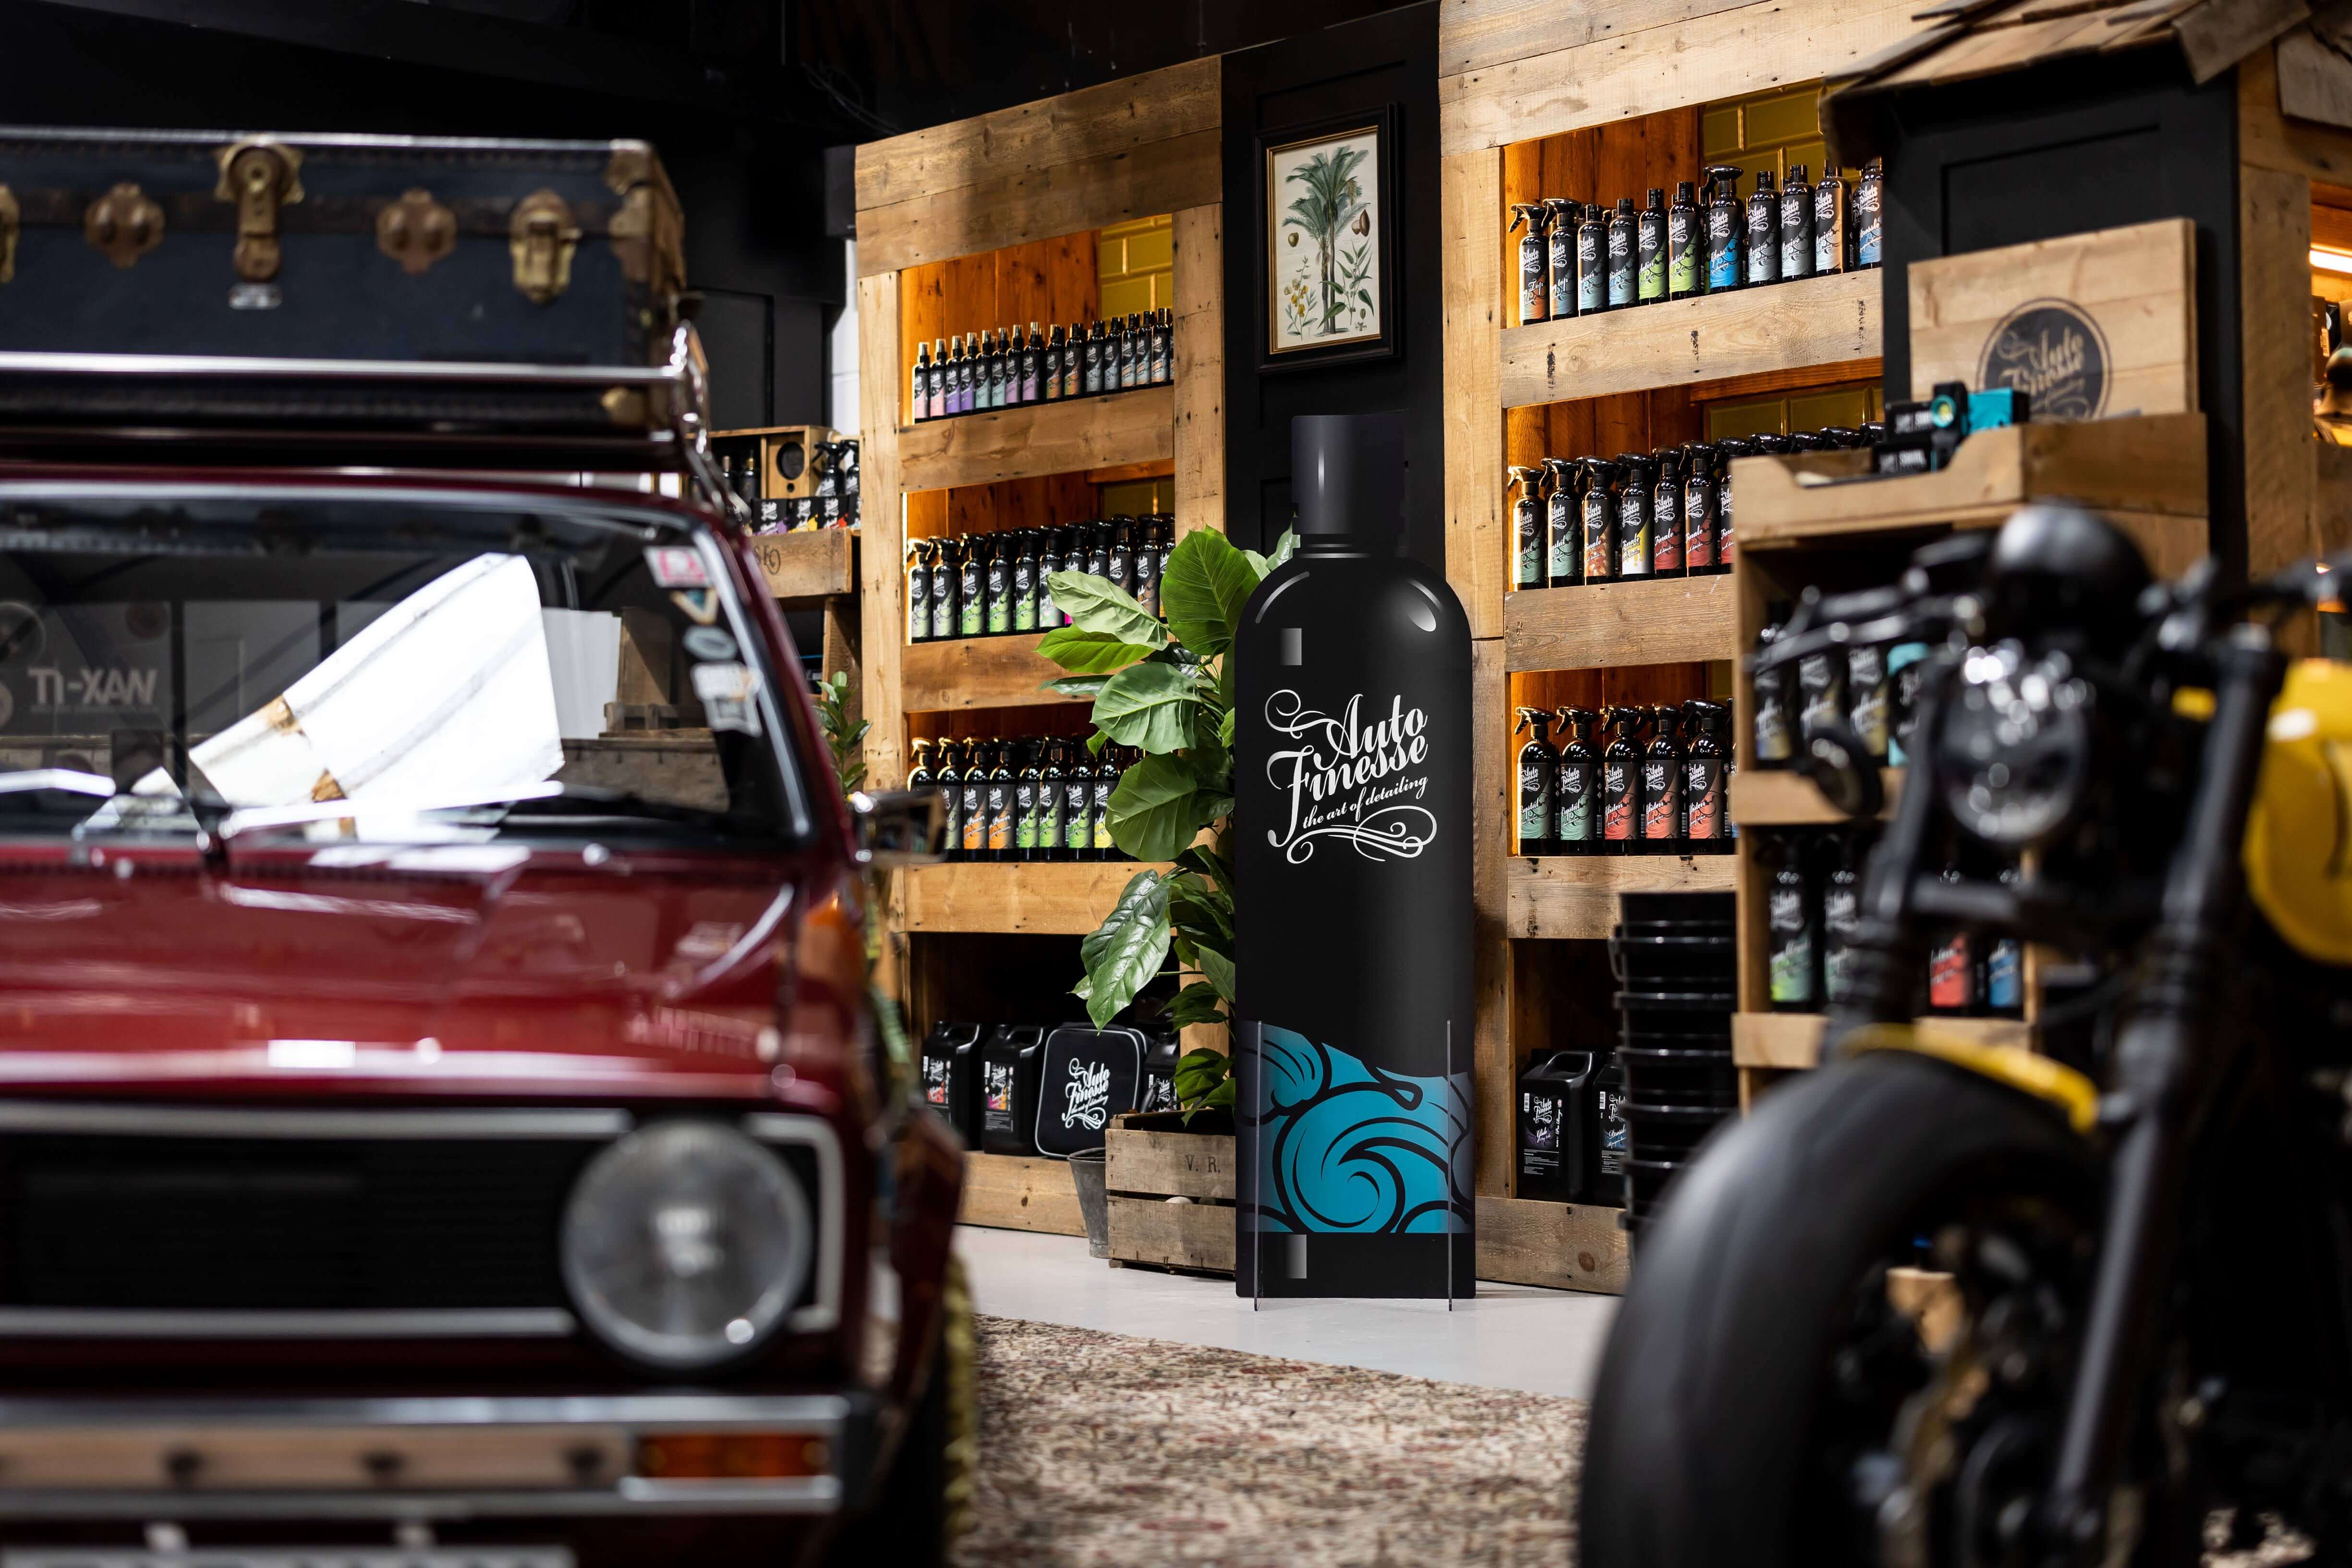 Auto Finesse | Become a Stockist | Wholesale Detailing Products | Apply Today